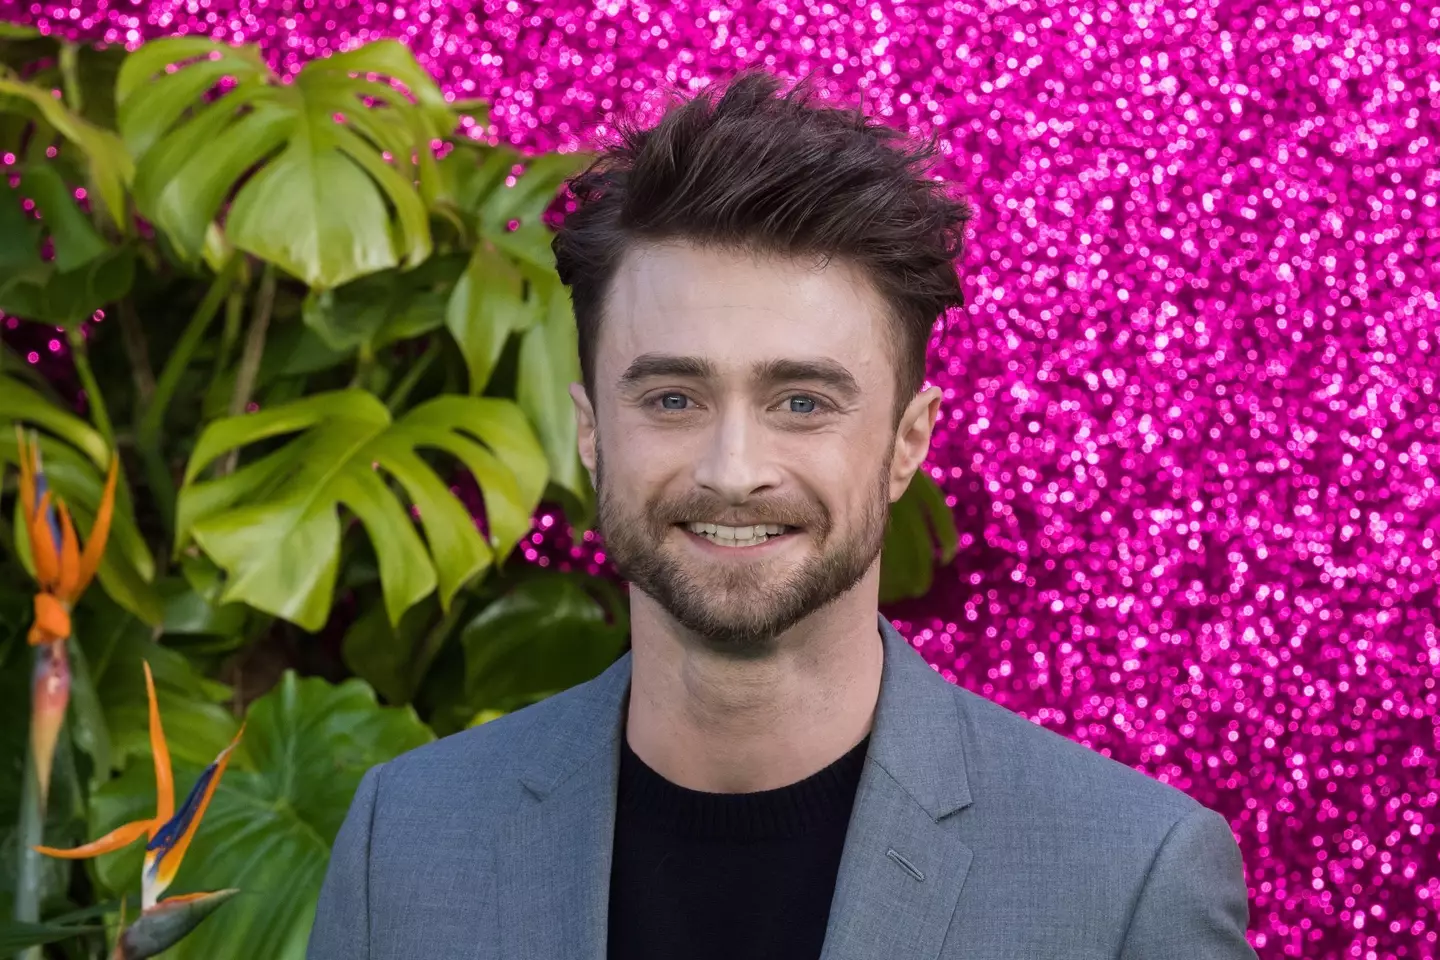 Daniel Radcliffe would return to Harry Potter on one condition.